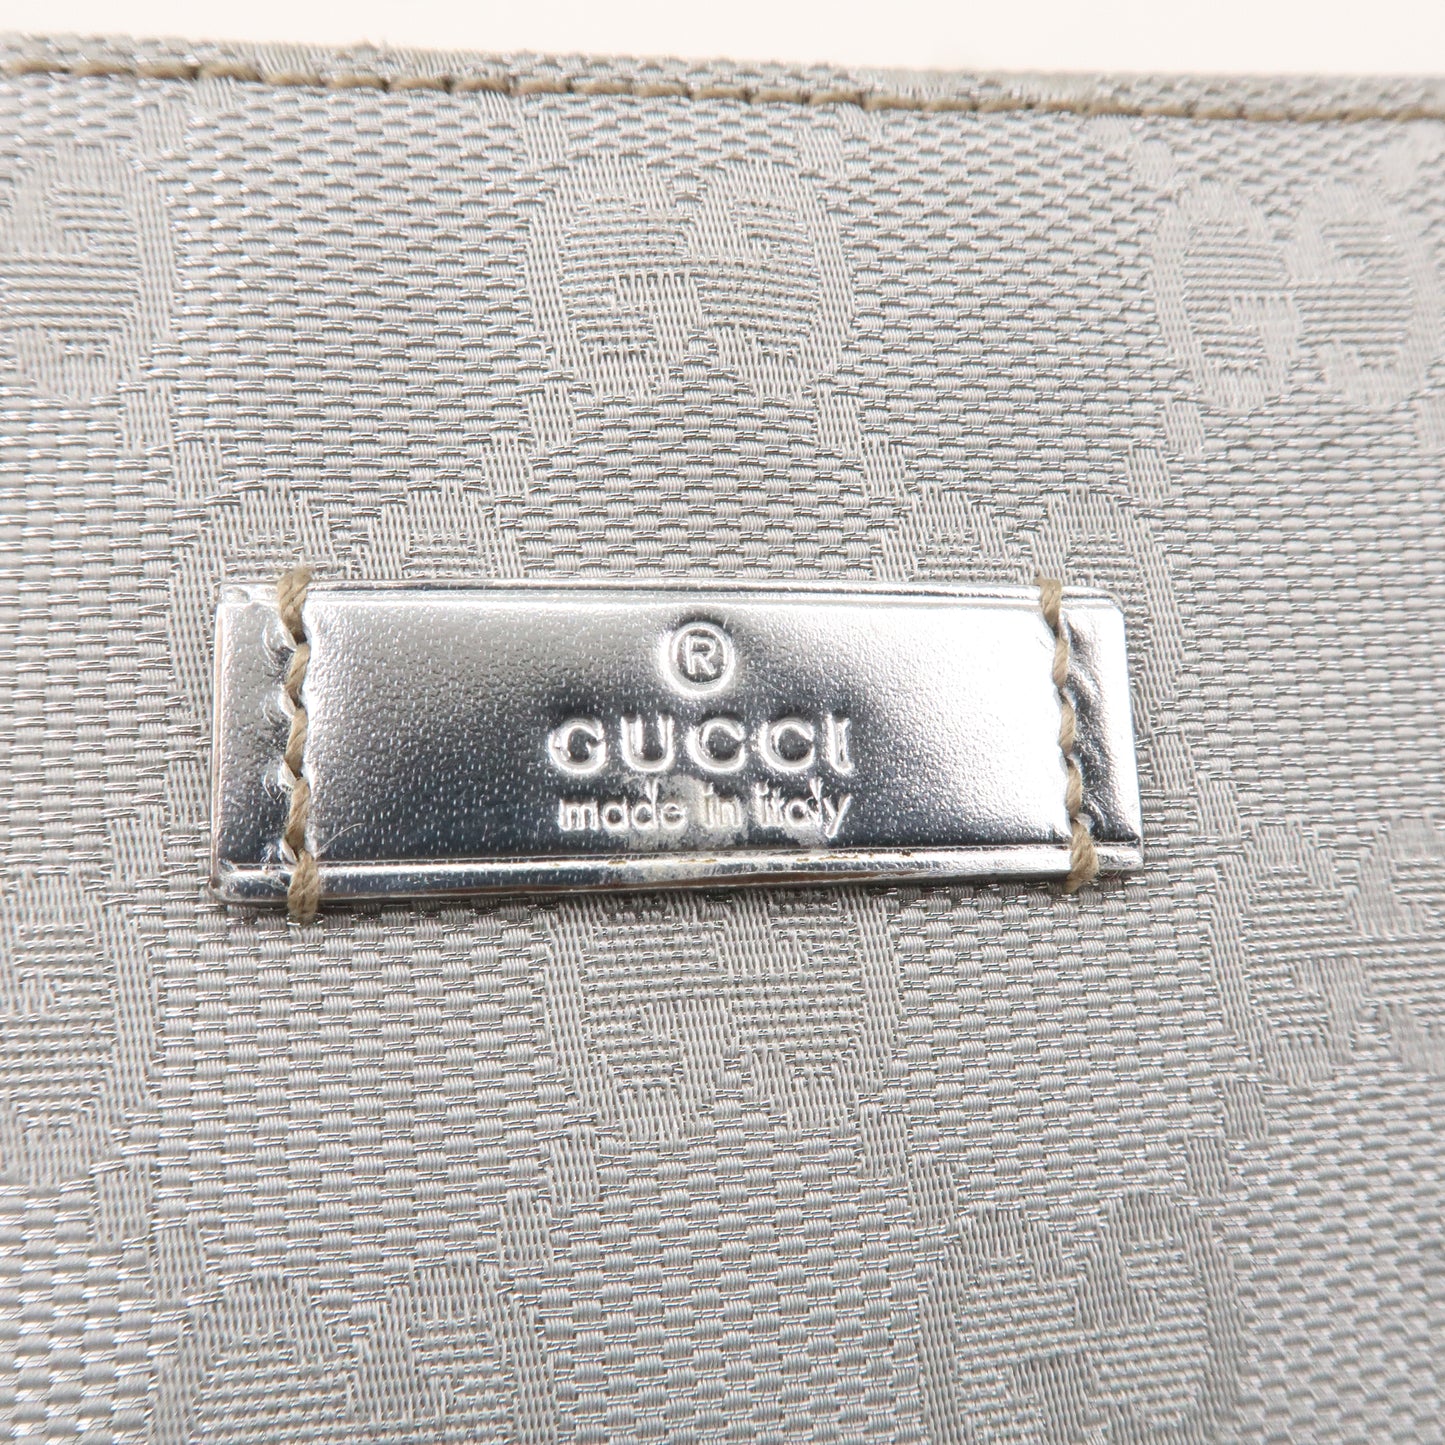 GUCCI Boat Bag Set of 2 GG Canvas Leather Hand Bag 07198 190393